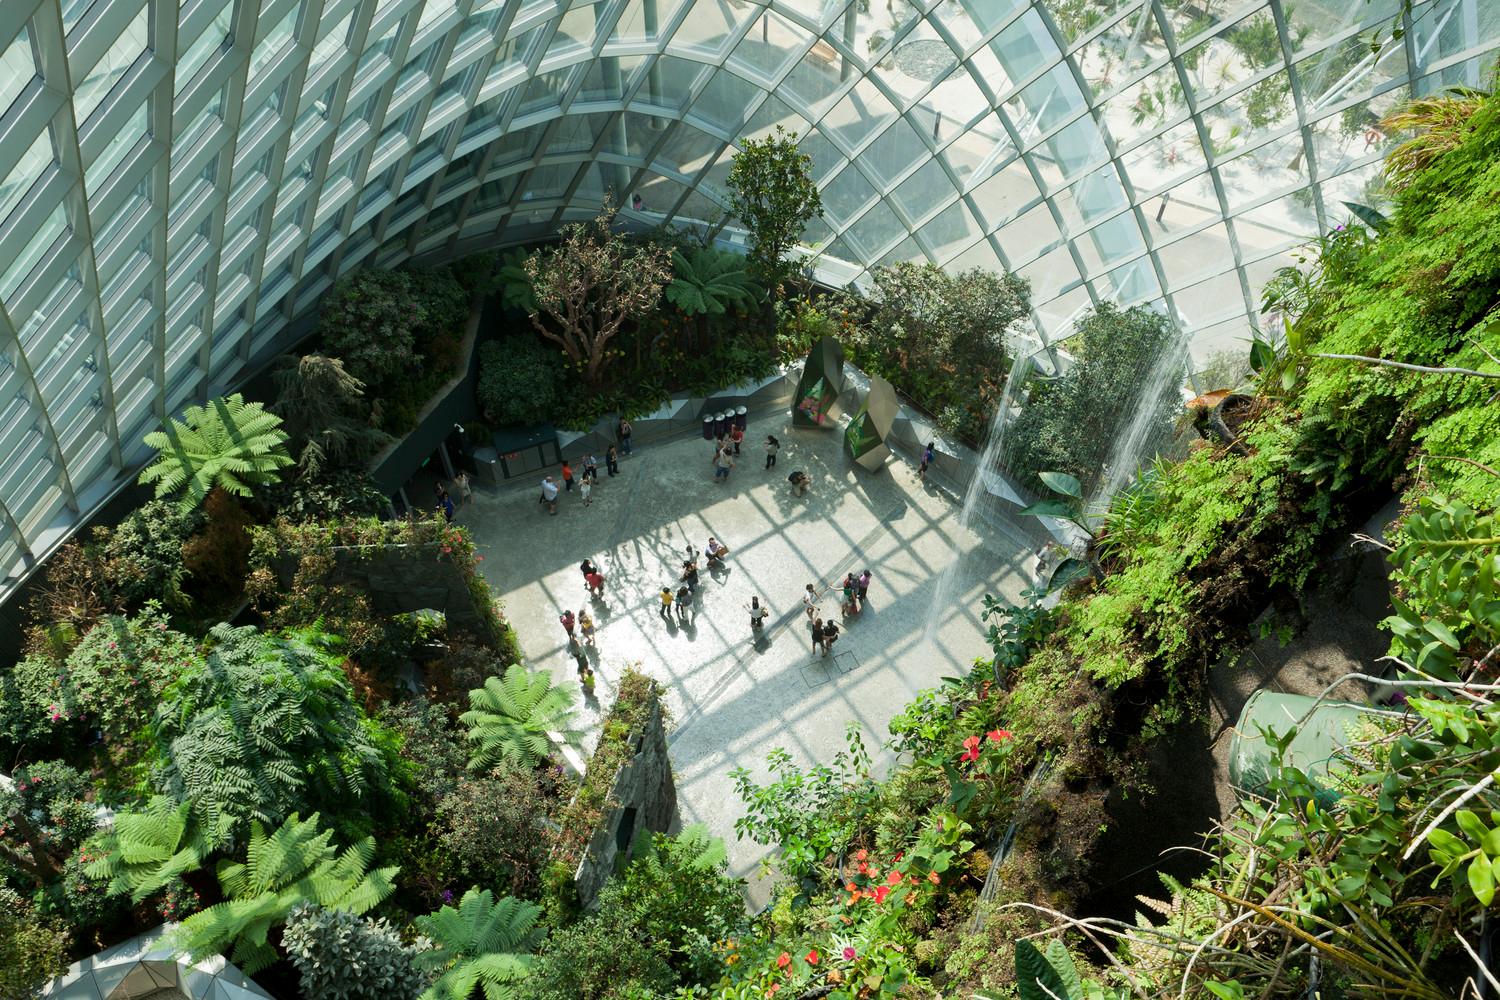 Cooled Conservatories, Gardens by the Bay - View from the mountain in the Cloud Forest